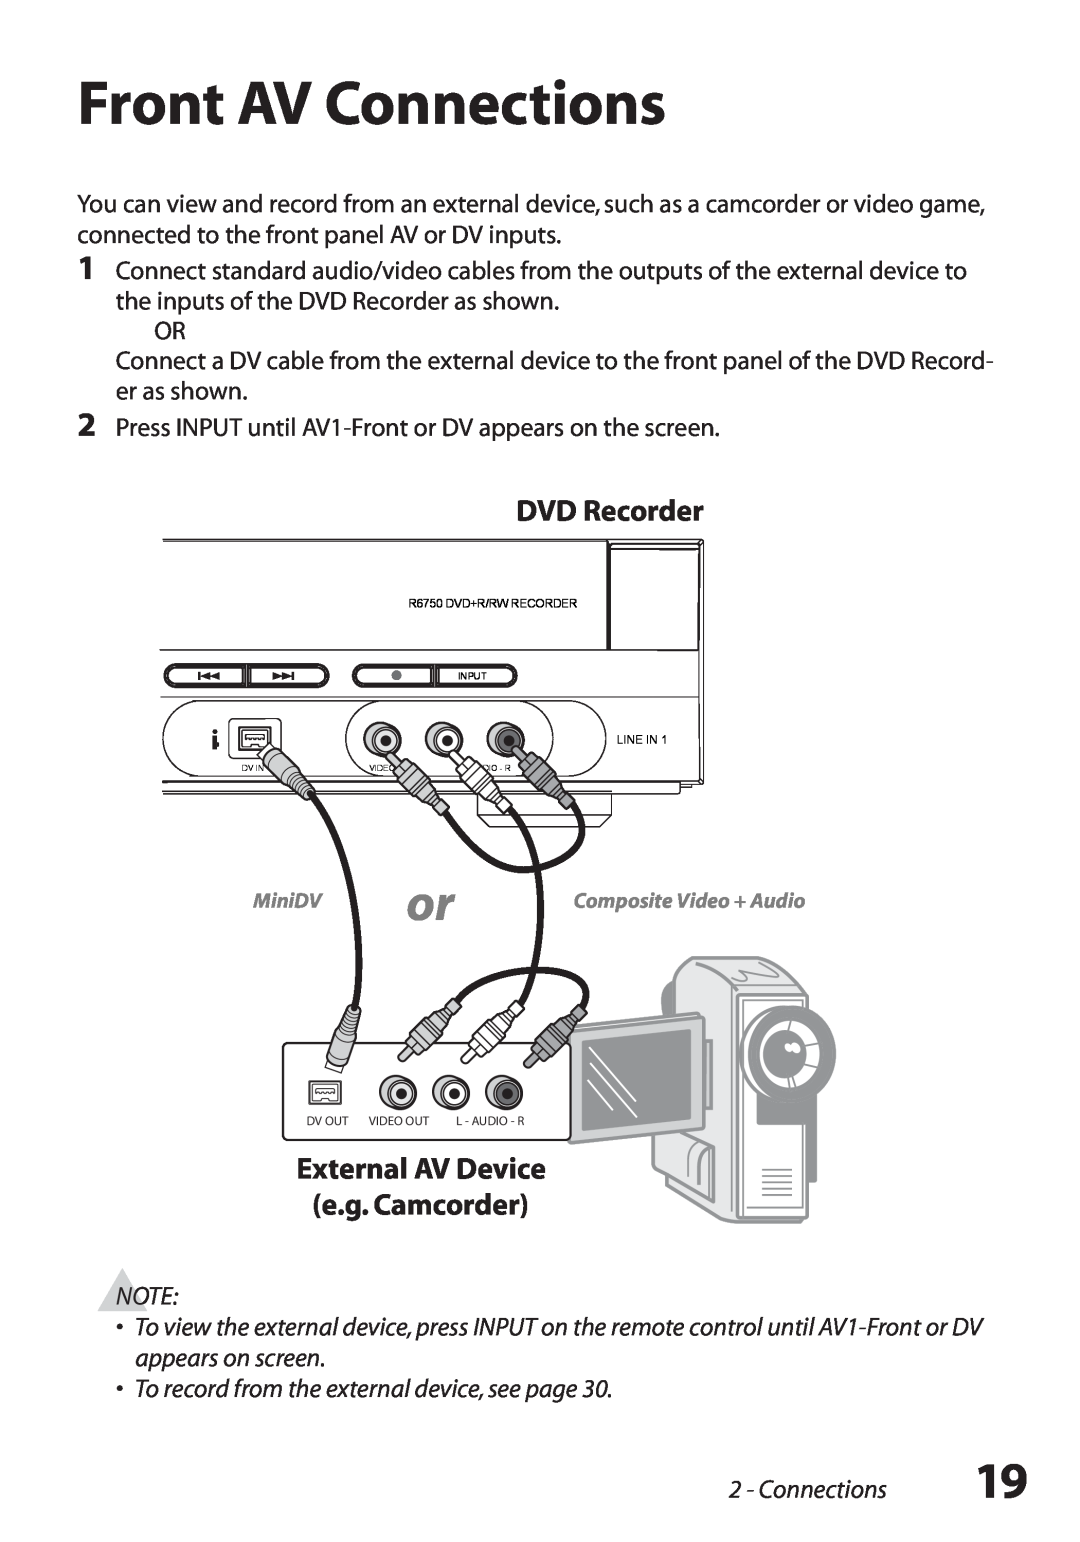 GoVideo manual Front AV Connections, To record from the external device, see page, R6750 DVD+R/RW RECORDER, Line In 